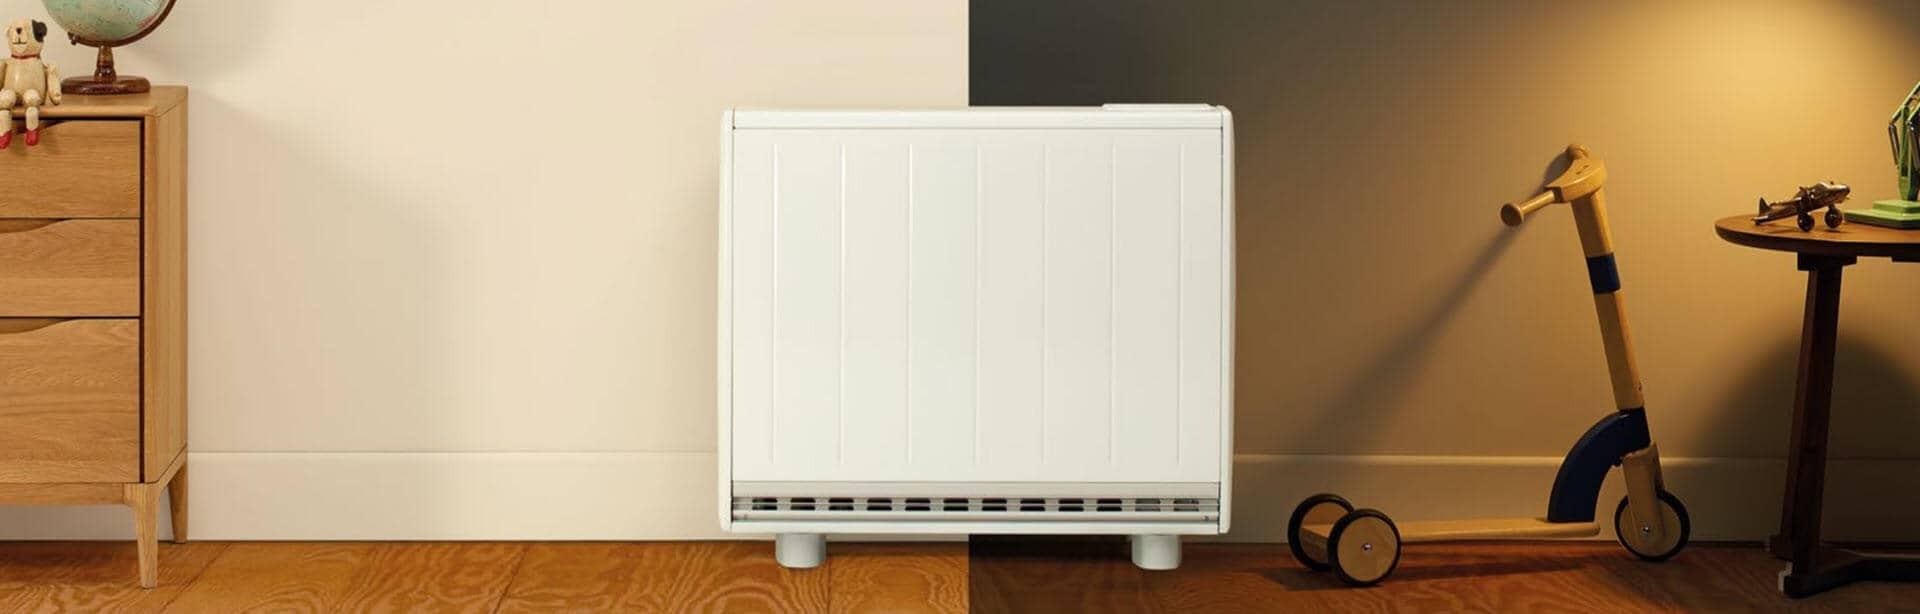 Ideal install modern electric heating systems in Edinburgh homes and flats.